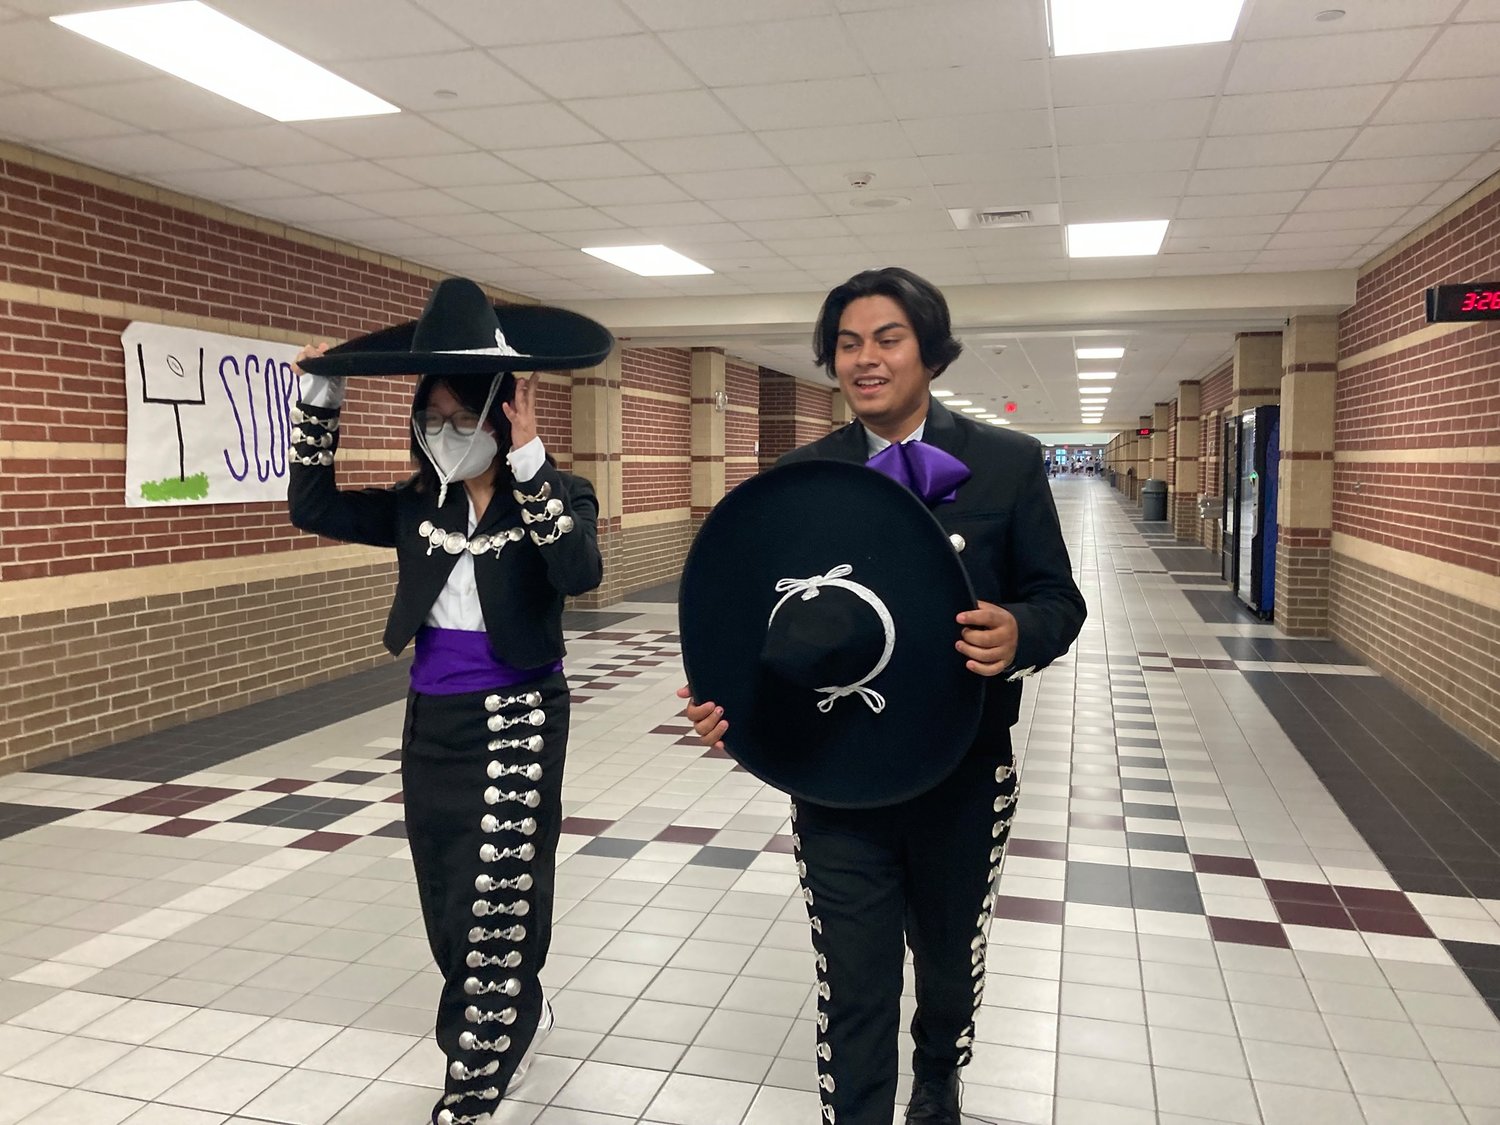 MRHS mariachi group members Evelyn Garcia and Pedro Barrera display the group's new mariachi uniforms. The group is preparing this year for possible UIL competition performances next school year.